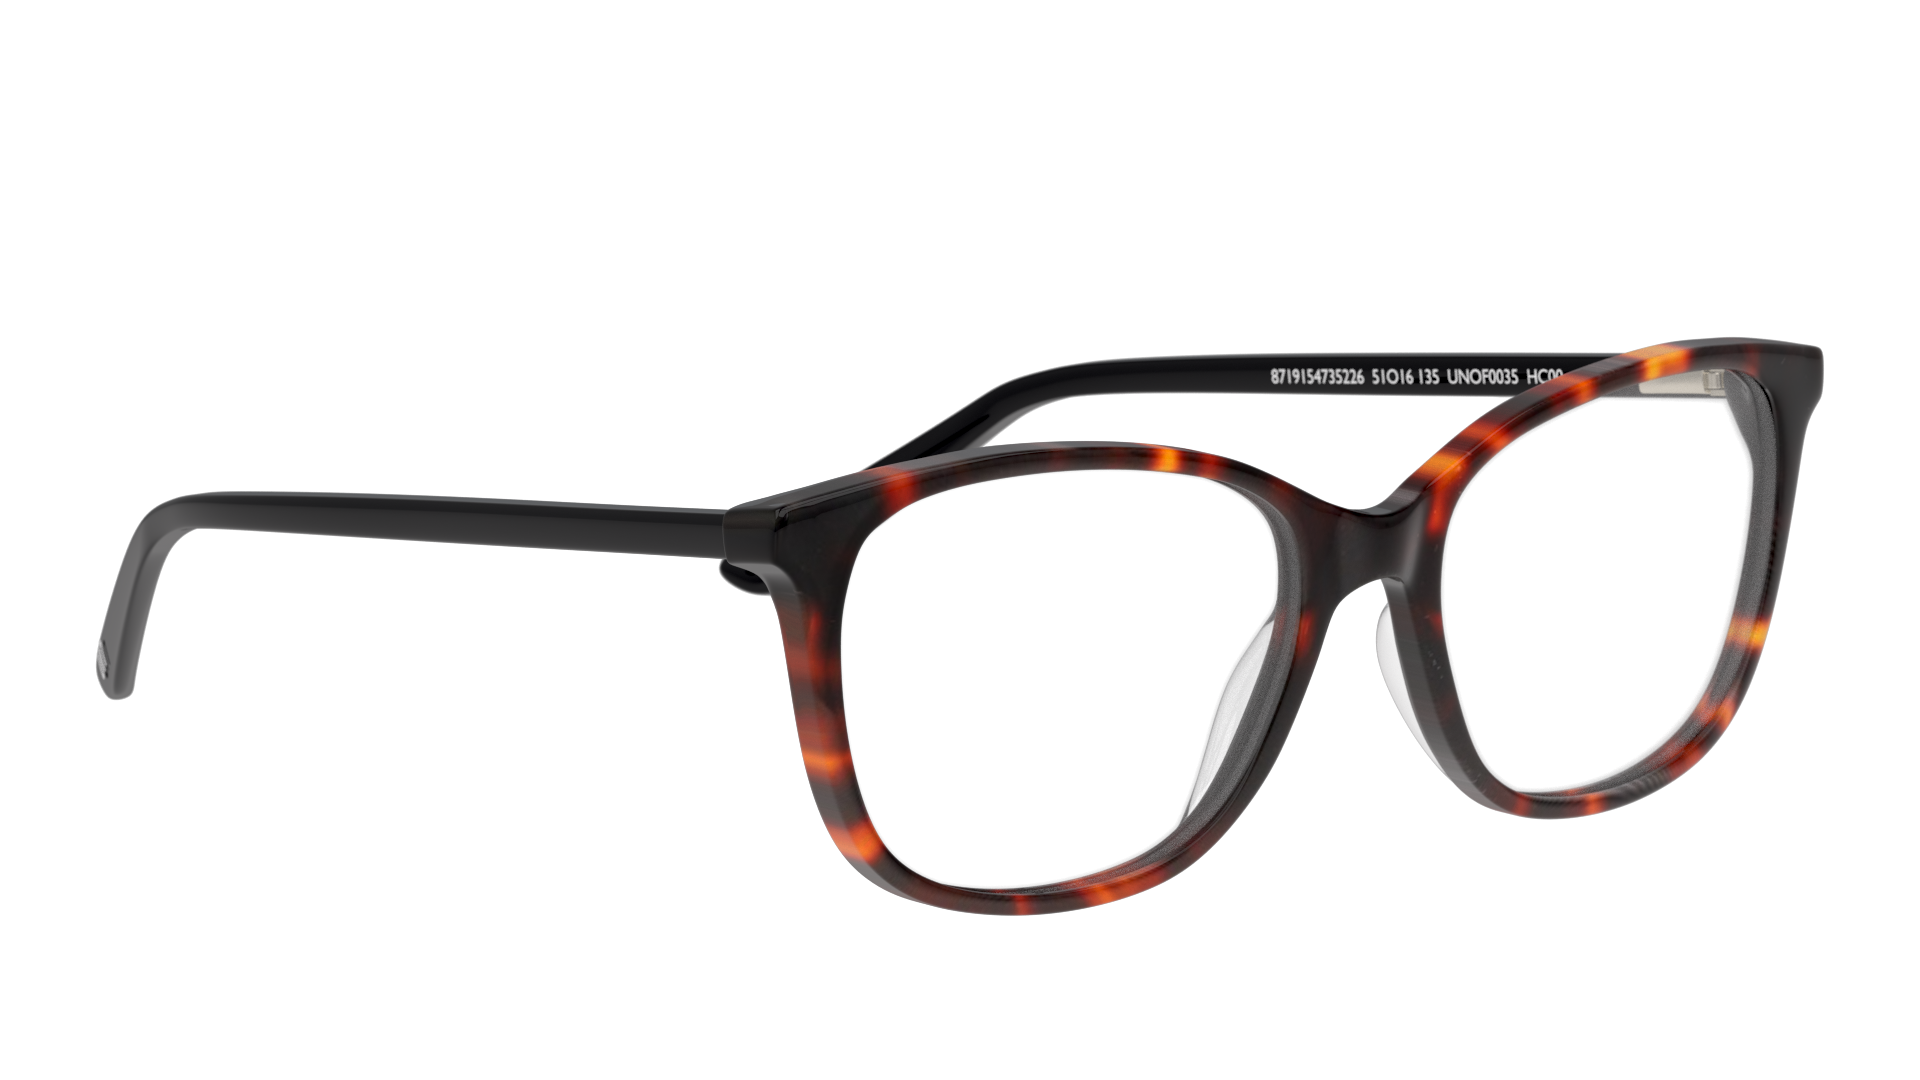 Angle_Right01 Unofficial UNOF0035 Glasses Transparent / Tortoise Shell